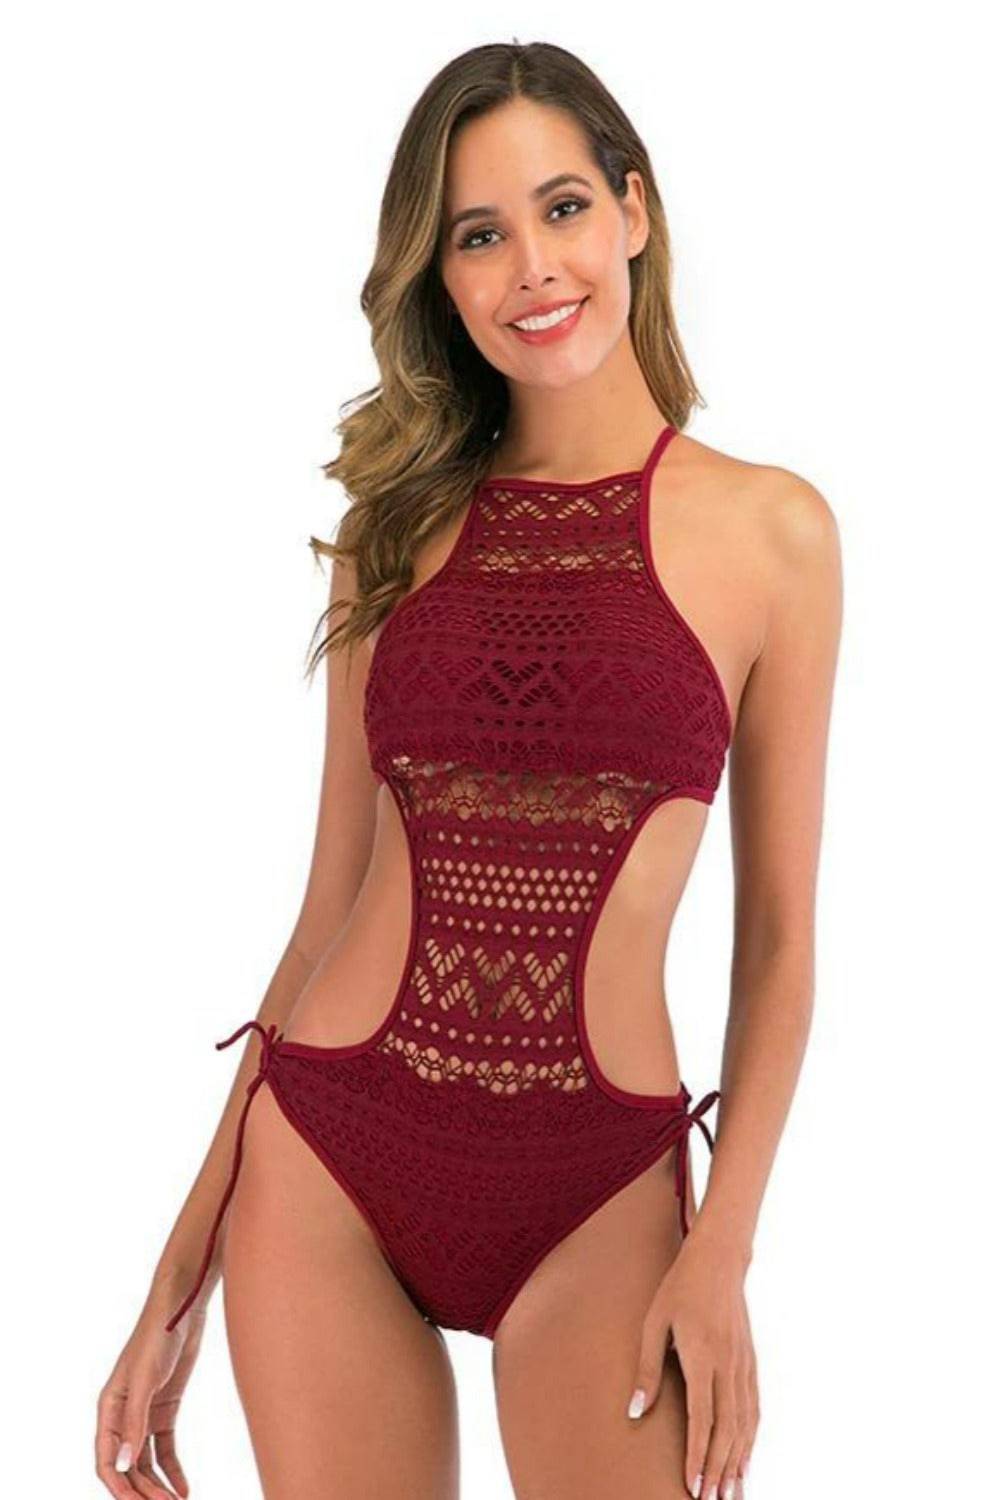 Swimming Costume for Women Tummy Control Push Up Swimwear V Neck Women's  One Piece Swimsuit Bathing Suits Beachwear Plus Size for Teens, Girls (Red  2,S) price in UAE,  UAE